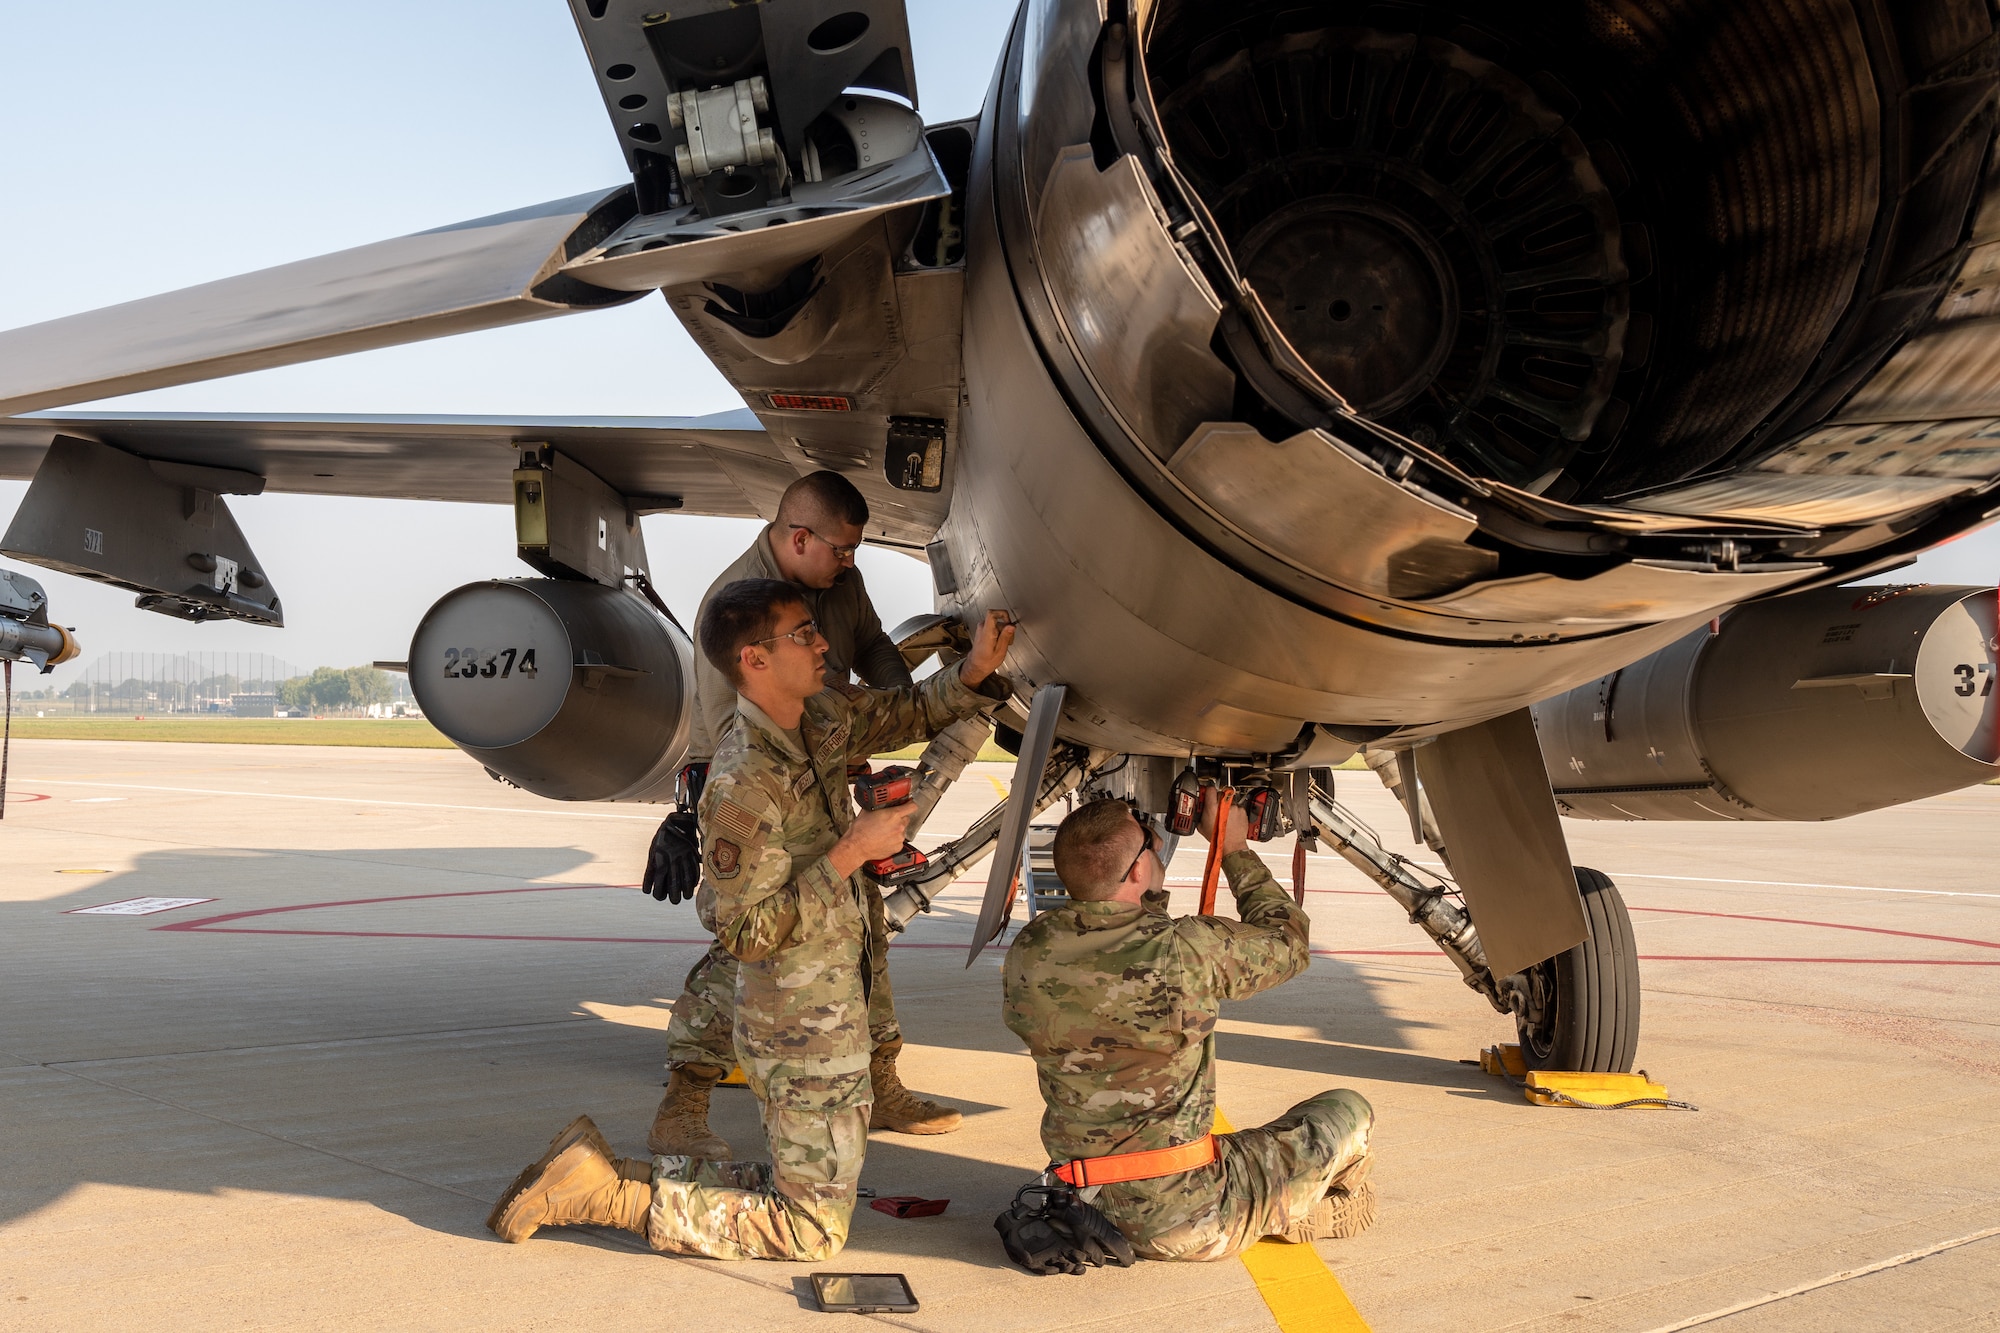 Several uniformed service members perform maintenance on a military aircraft.